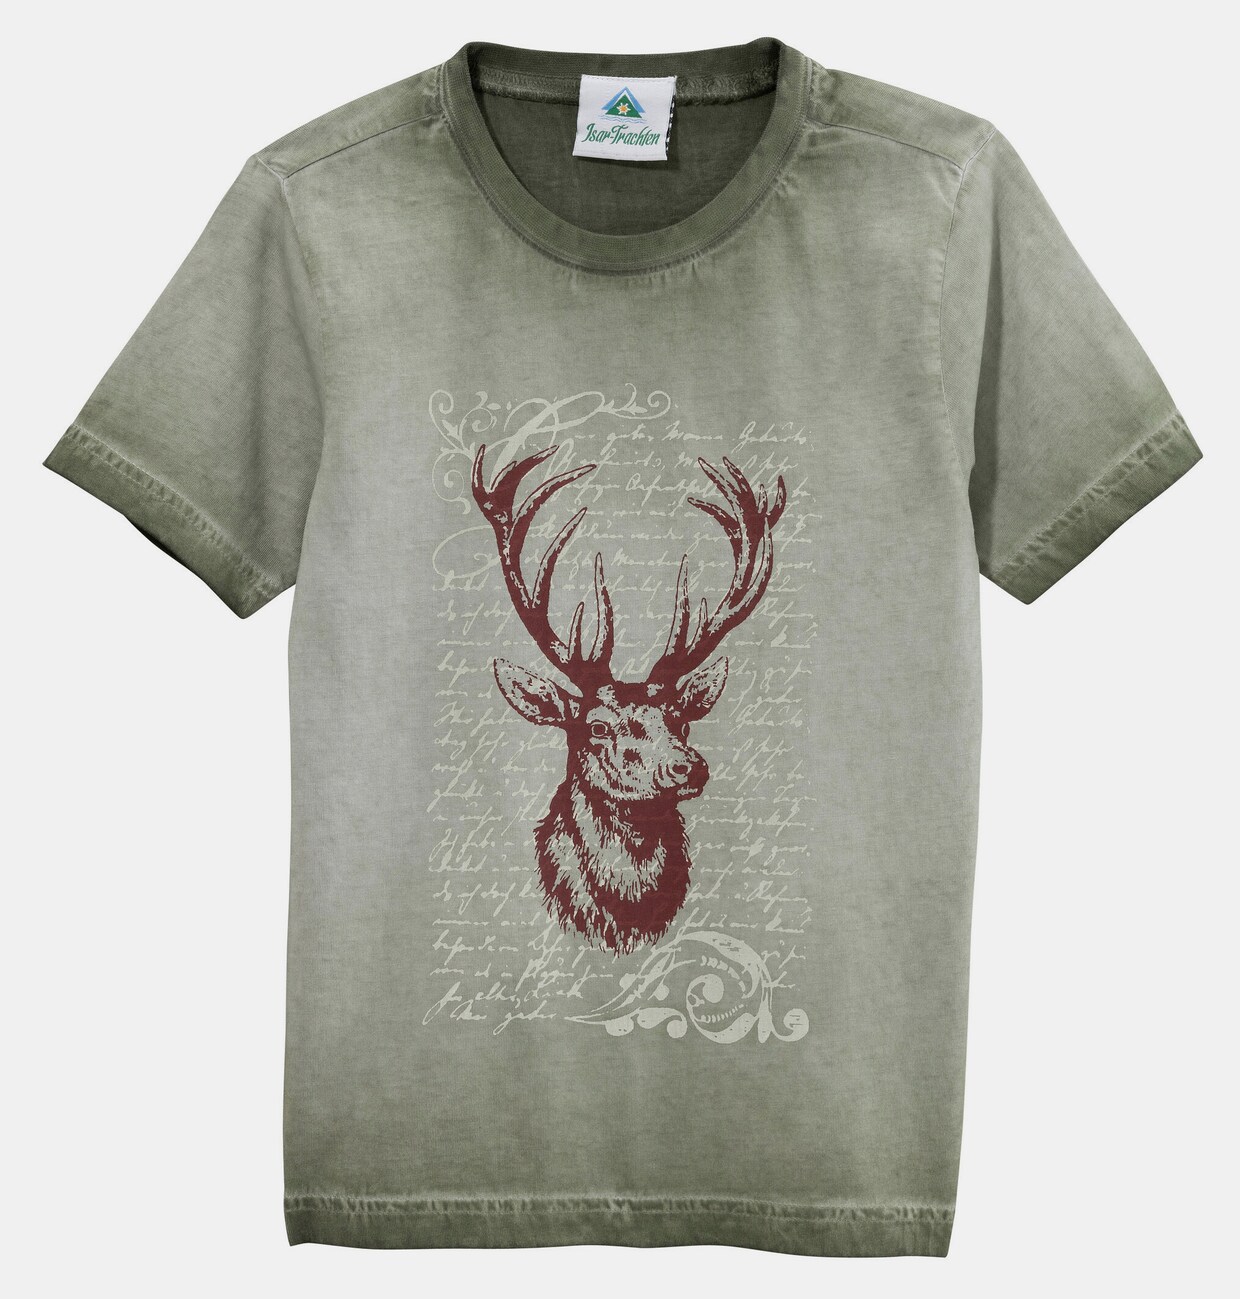 Isar-Trachten T-shirt country - olive